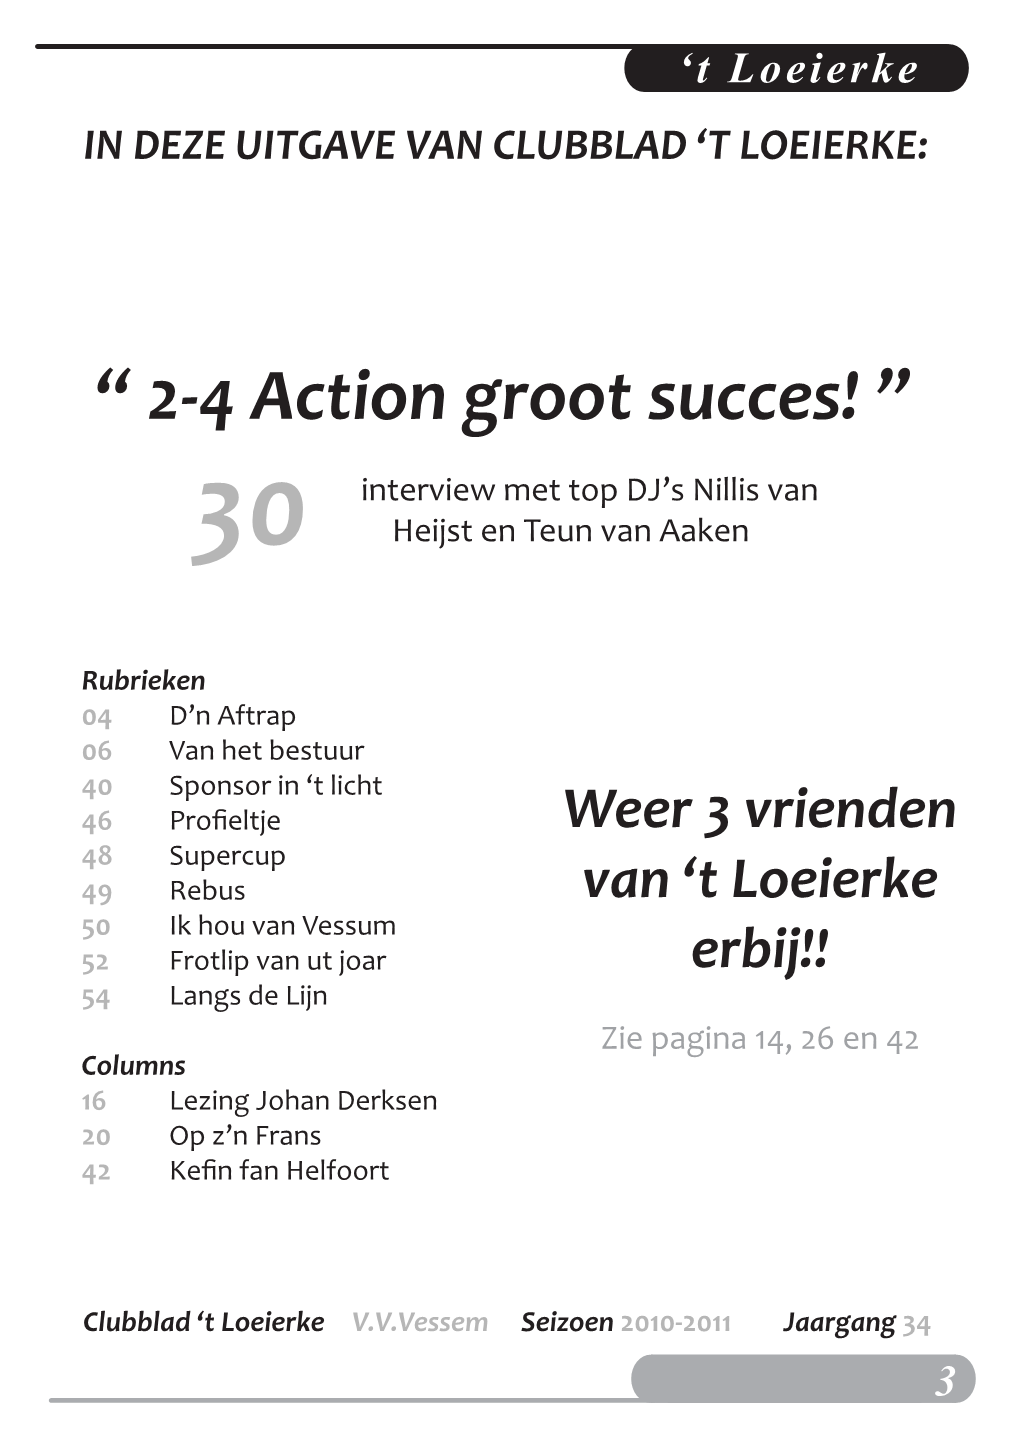 “ 2-4 Action Groot Succes! ”